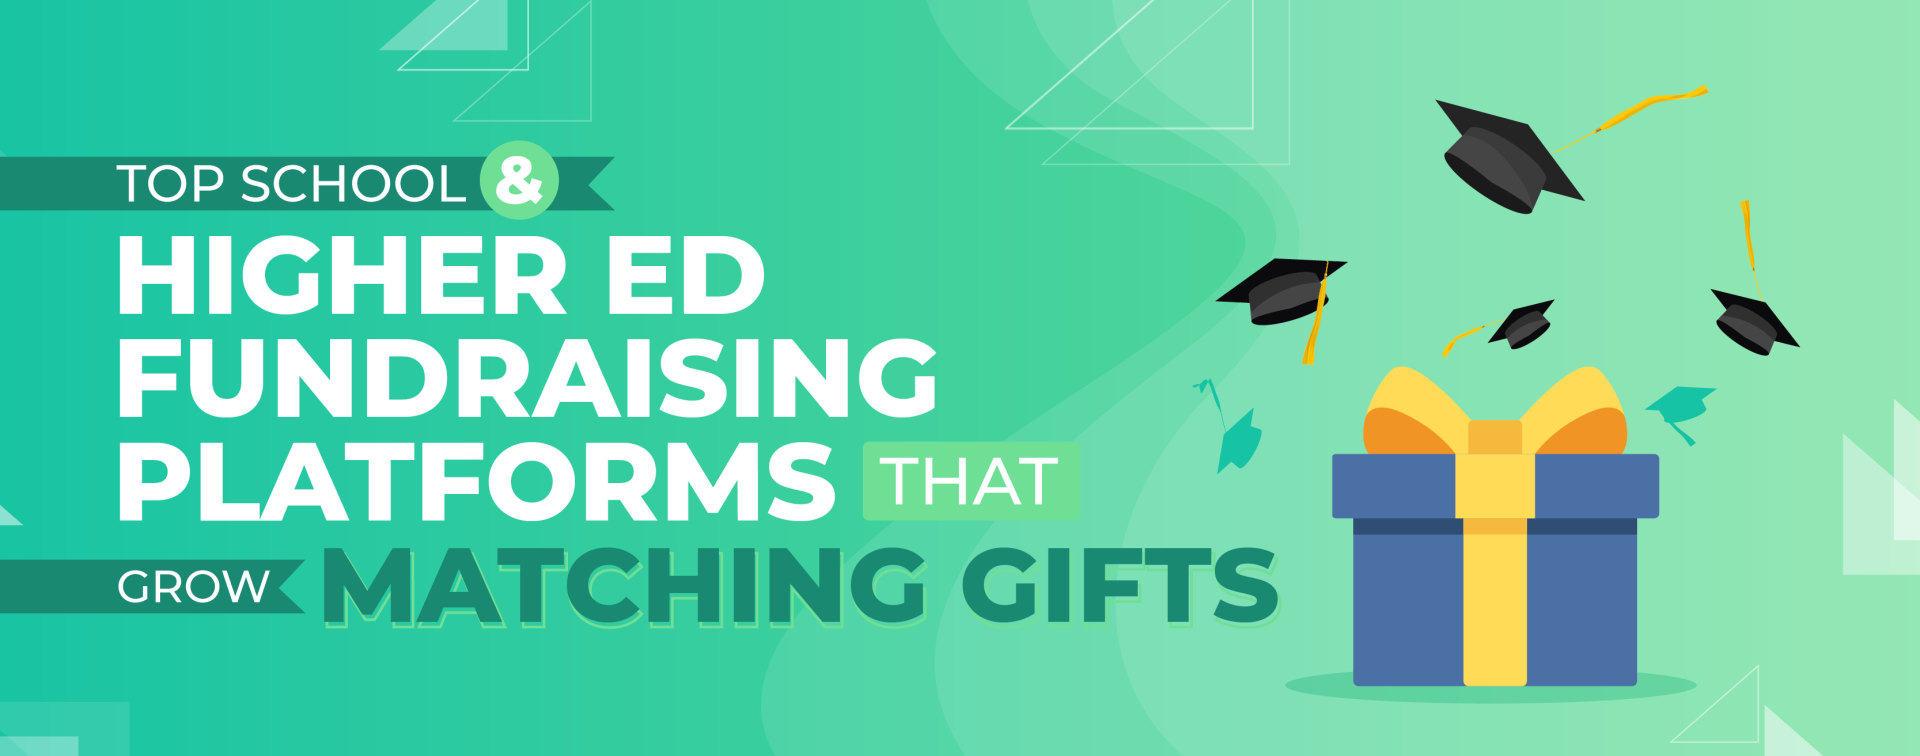 Find out how higher ed fundraising platforms can help you leverage matching gifts.